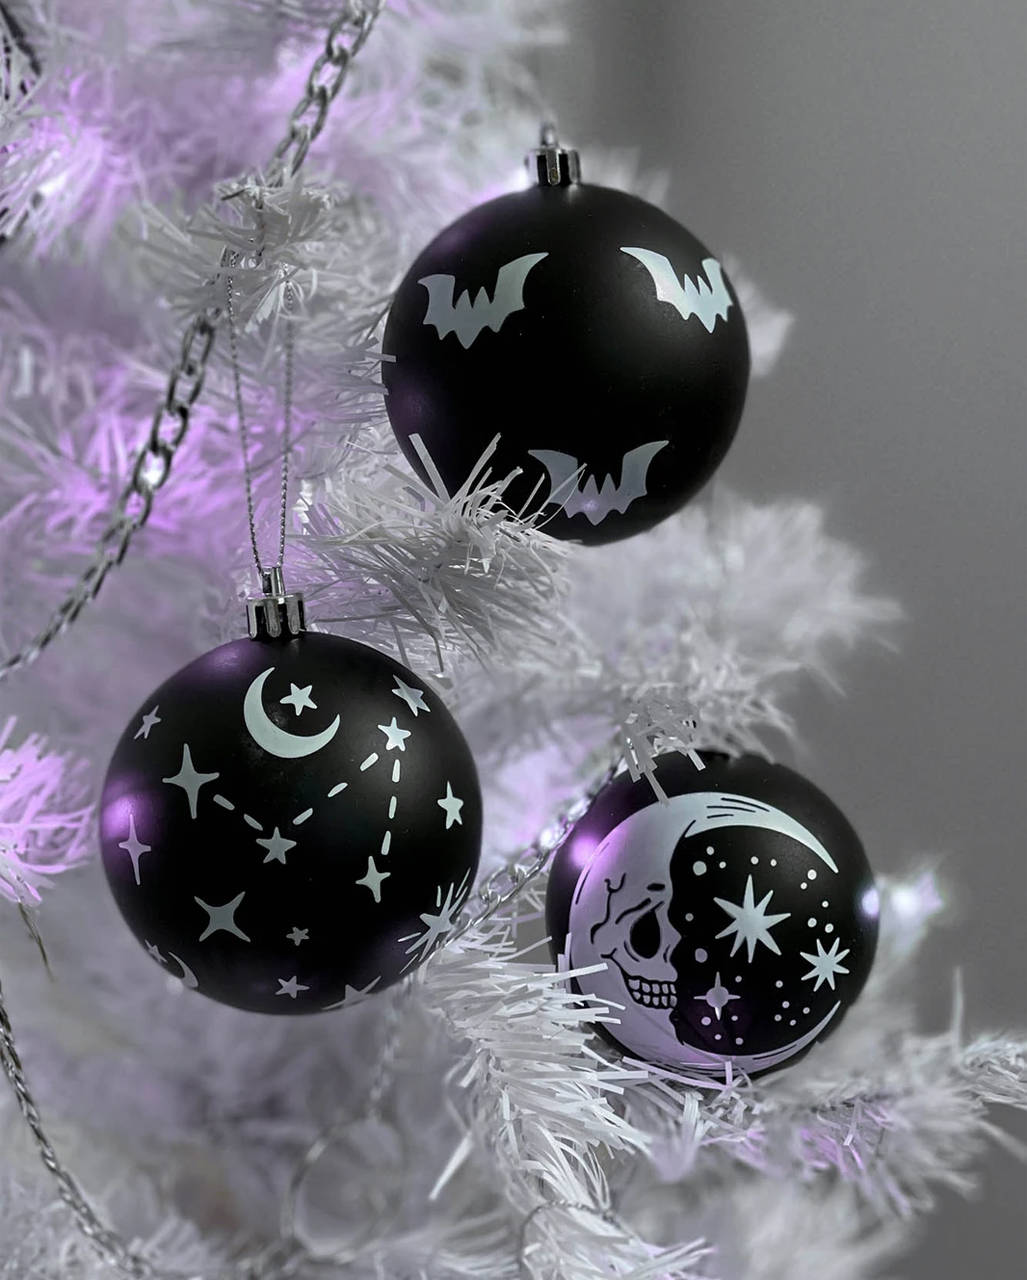 Enjoy a gothic and spooky Christmas with this eerie setting Wallpaper